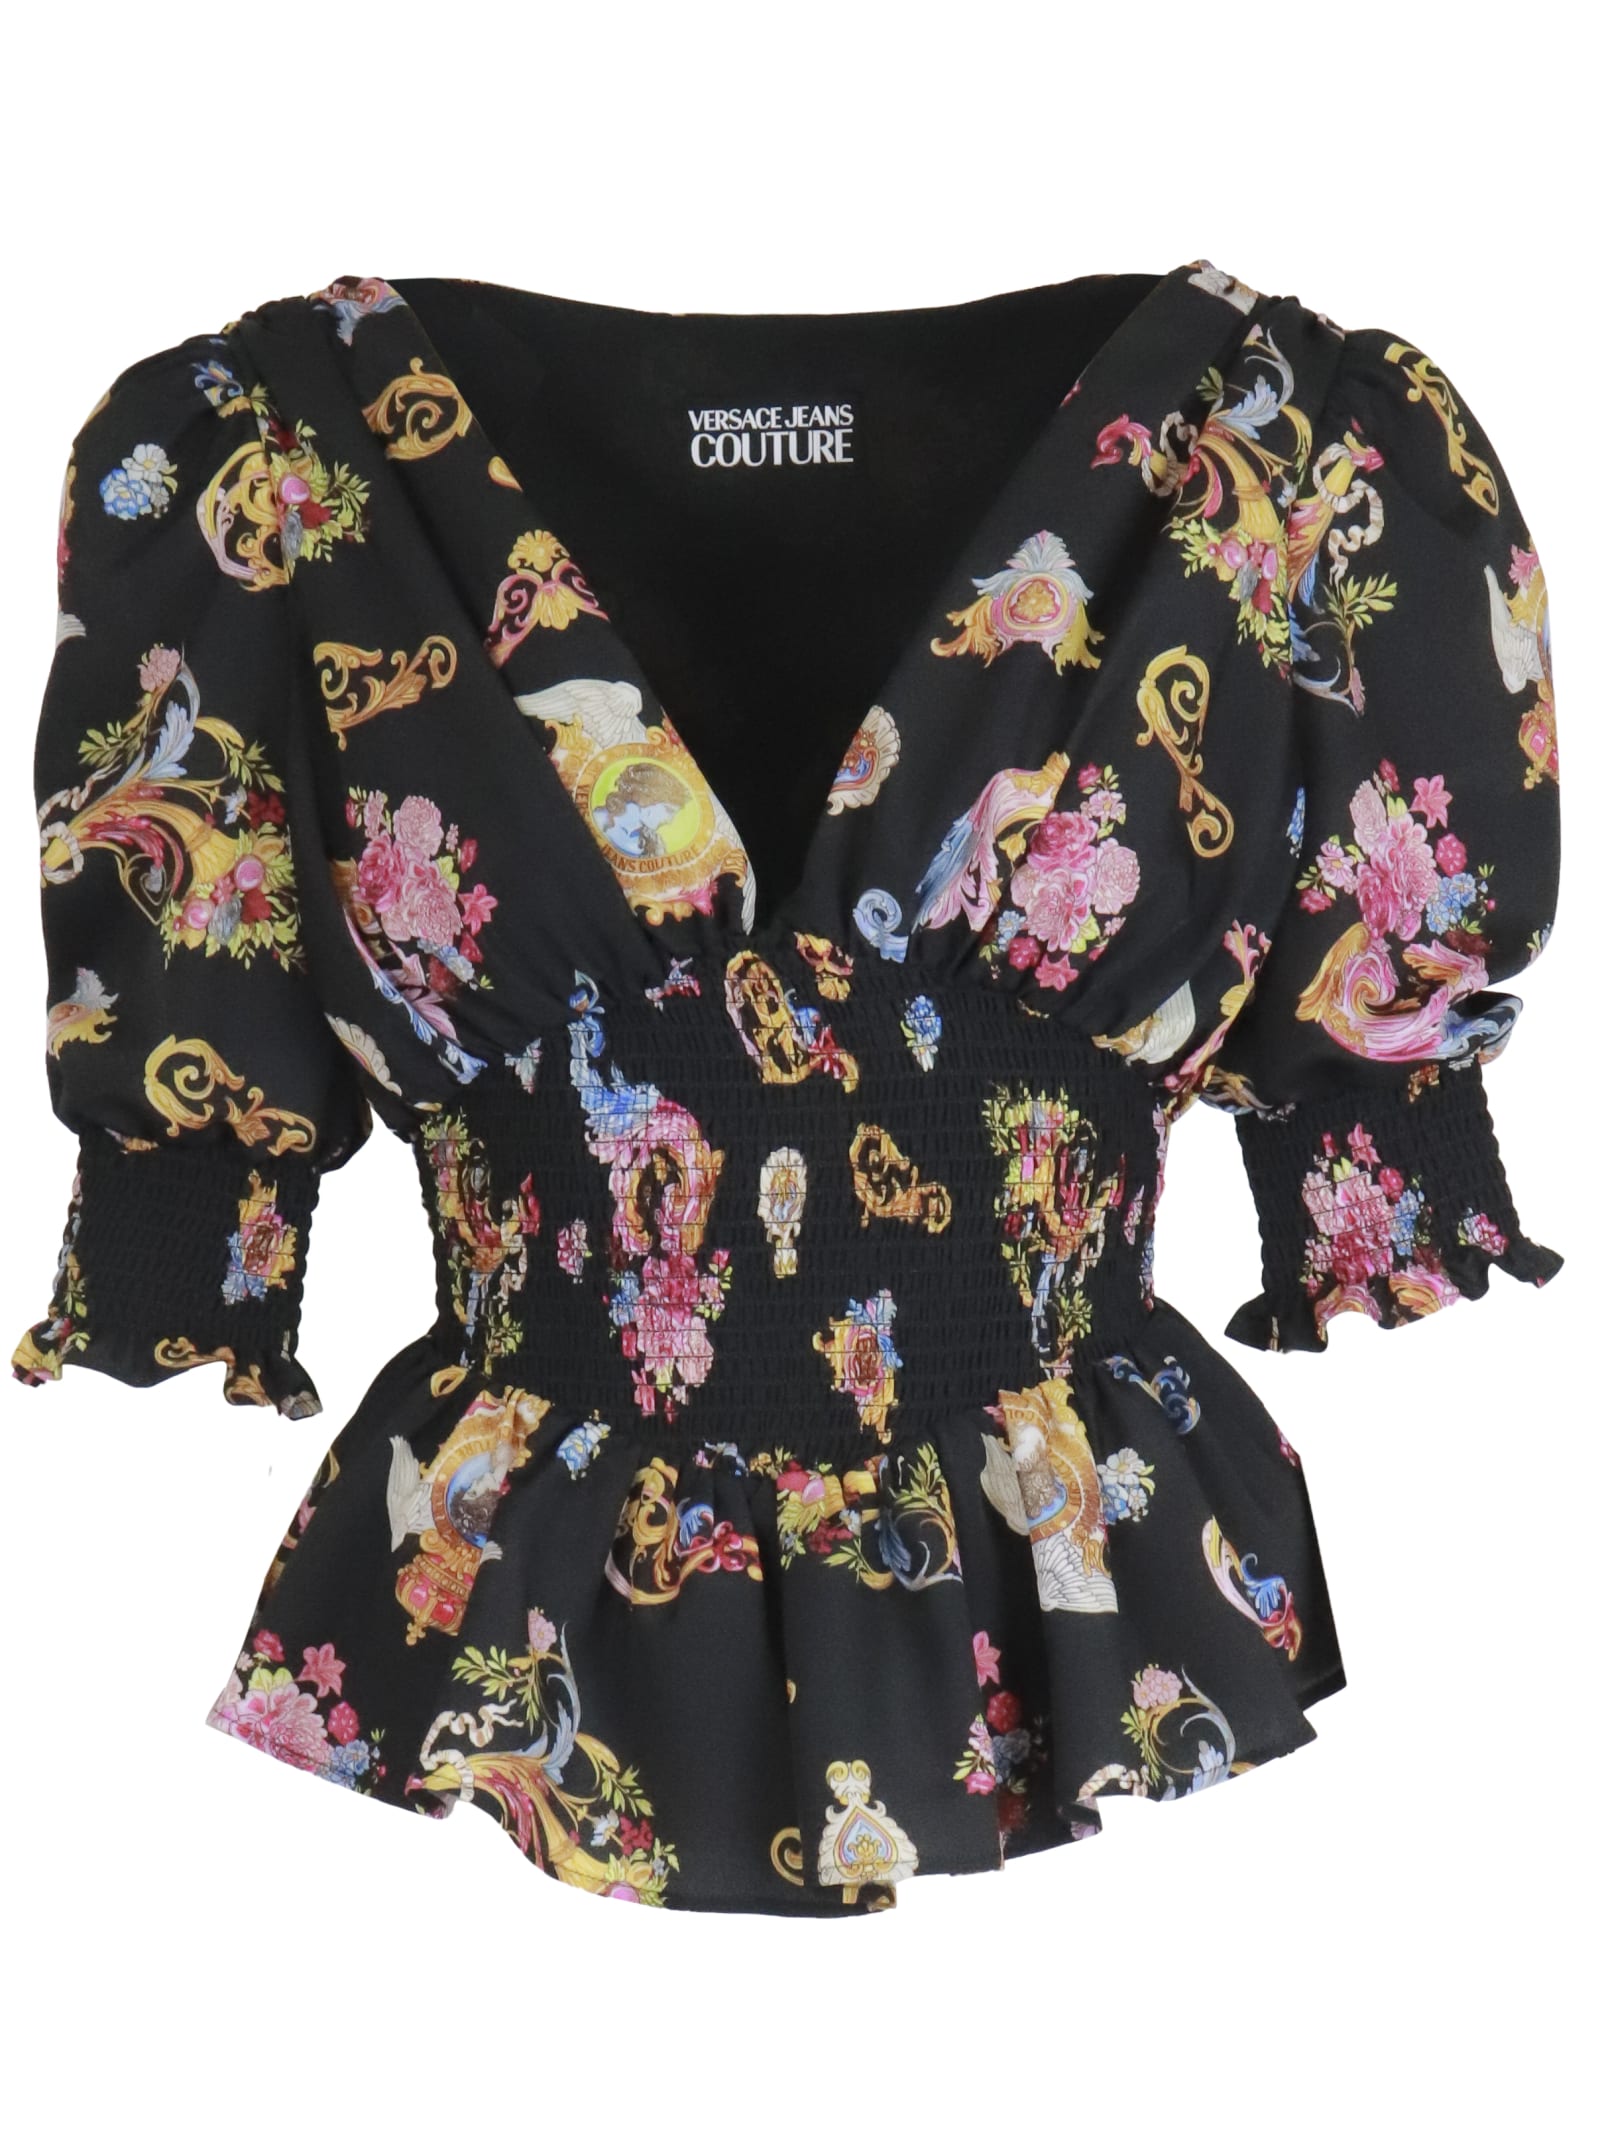 Versace Jeans Couture Print Cameo Shirt